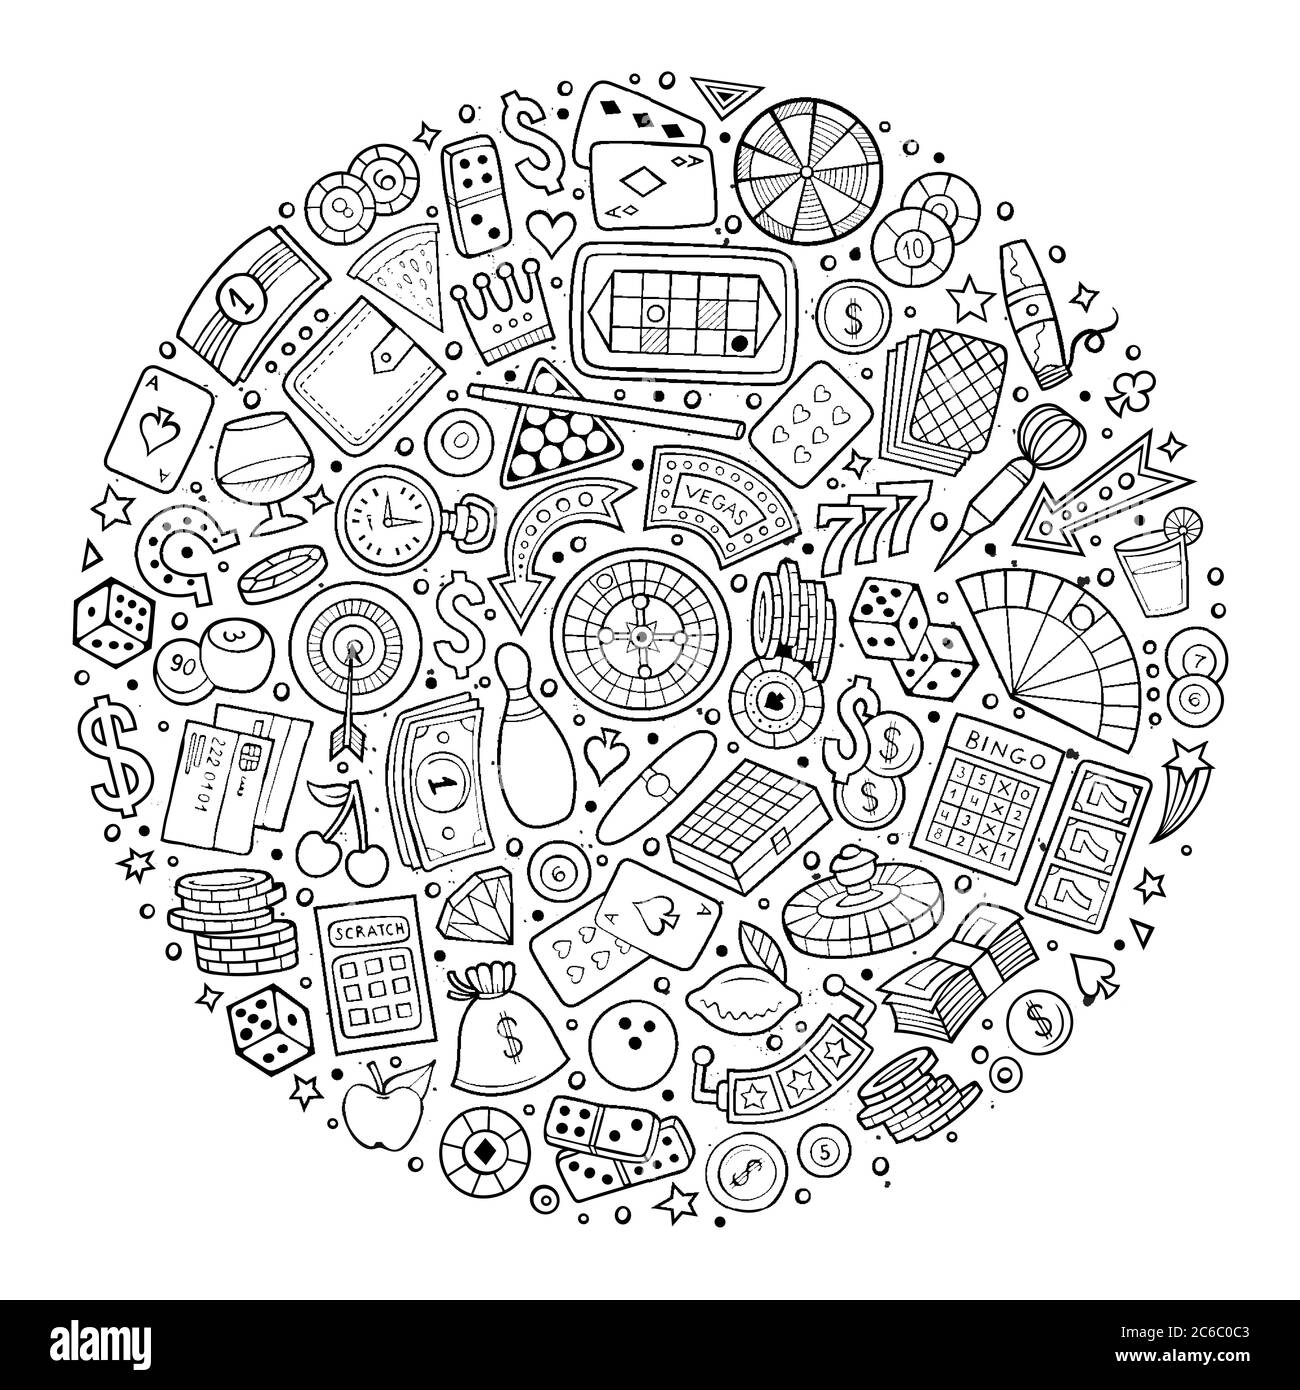 Set of Casino cartoon doodle objects, symbols and items Stock Vector